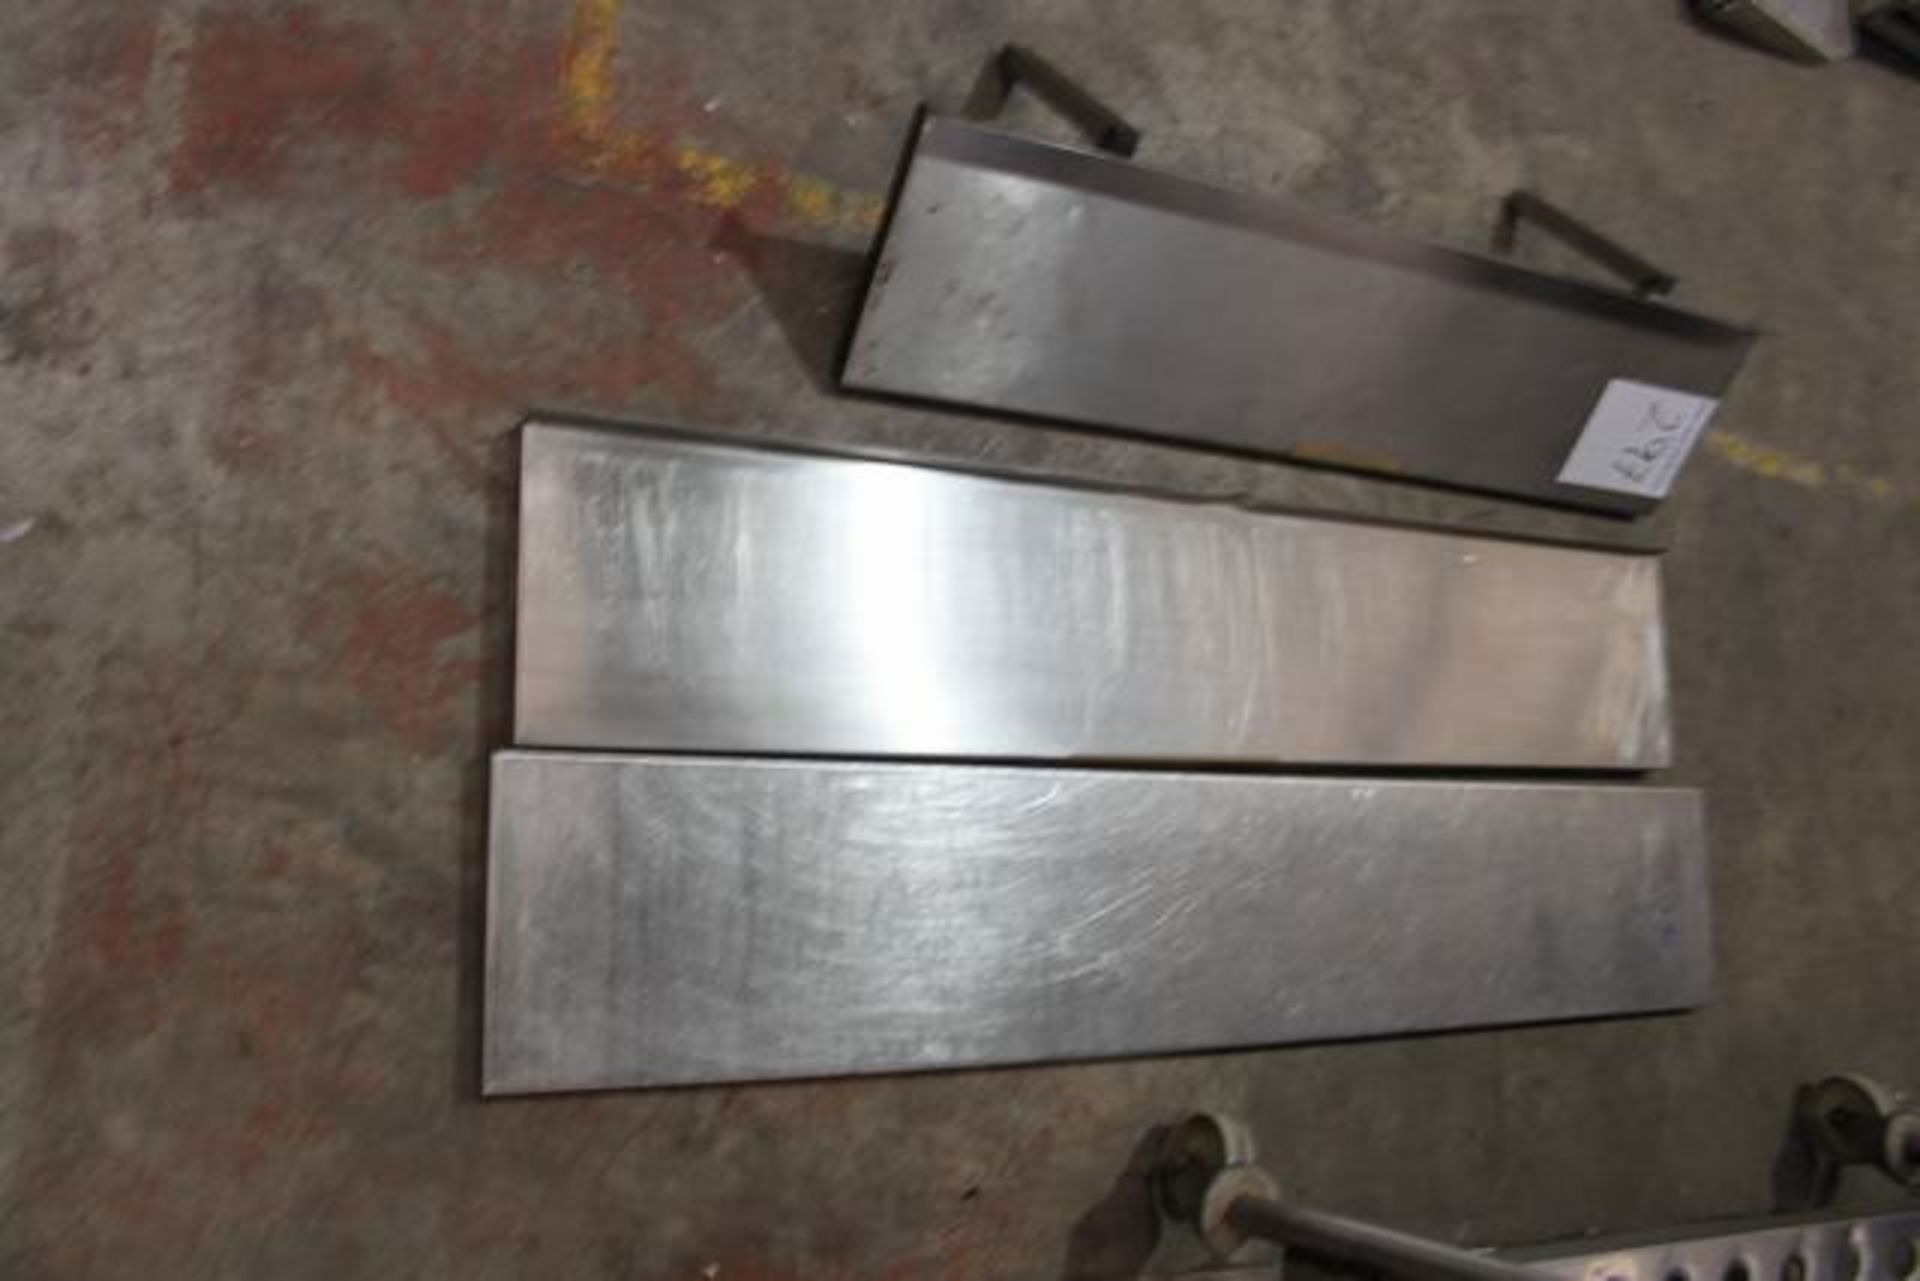 3 x Stainless steel wall shelf 1250mm x 300mm, 1560mm x 300mm and 1650mm x 300mm